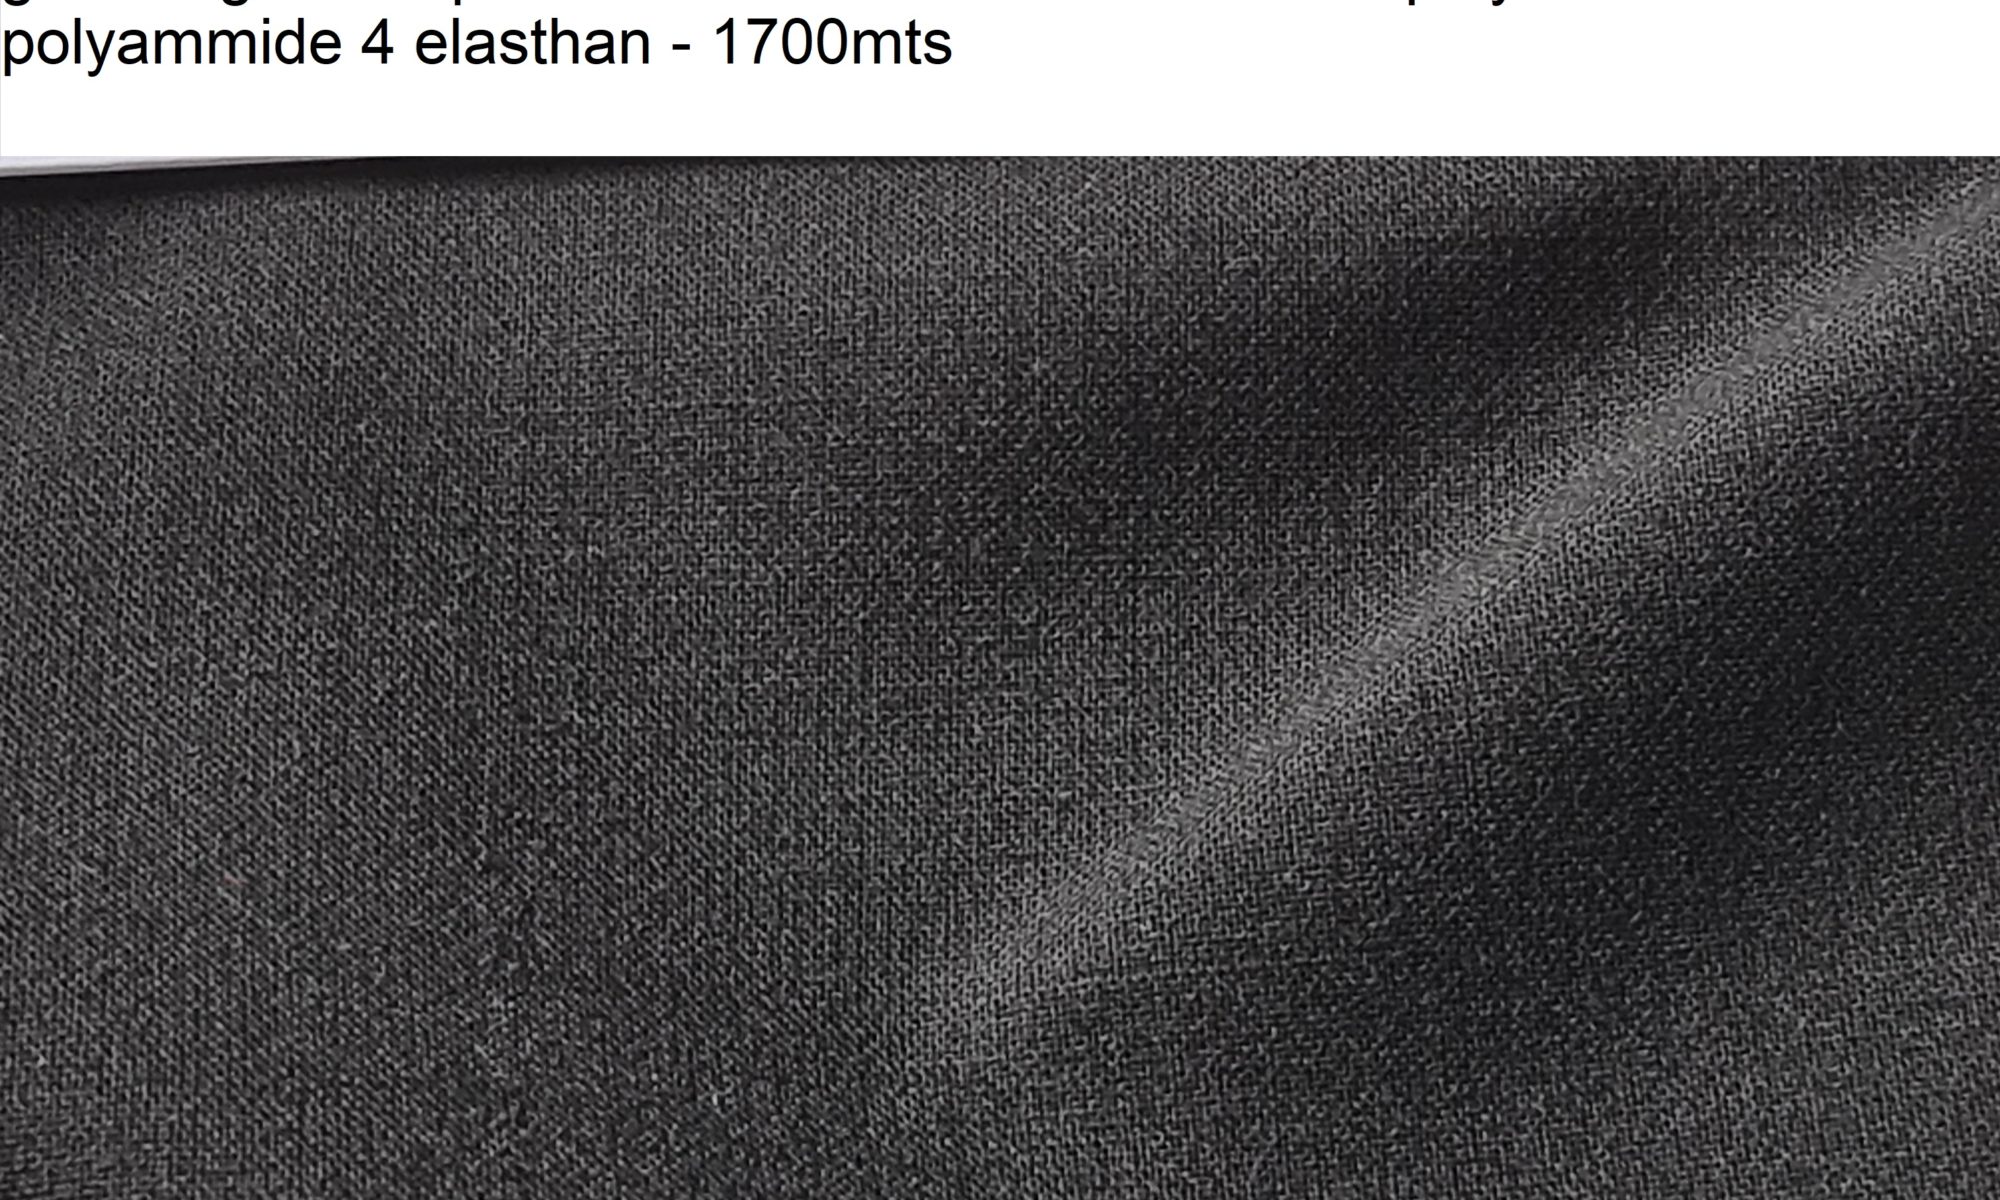 7582 black wool blend jacket coat fabric WIDTH cm130 WEIGHT gr425 - gr326 square meter - COMPOSITION 46 polyester 36 wool 14 polyammide 4 elasthan - 1700mts